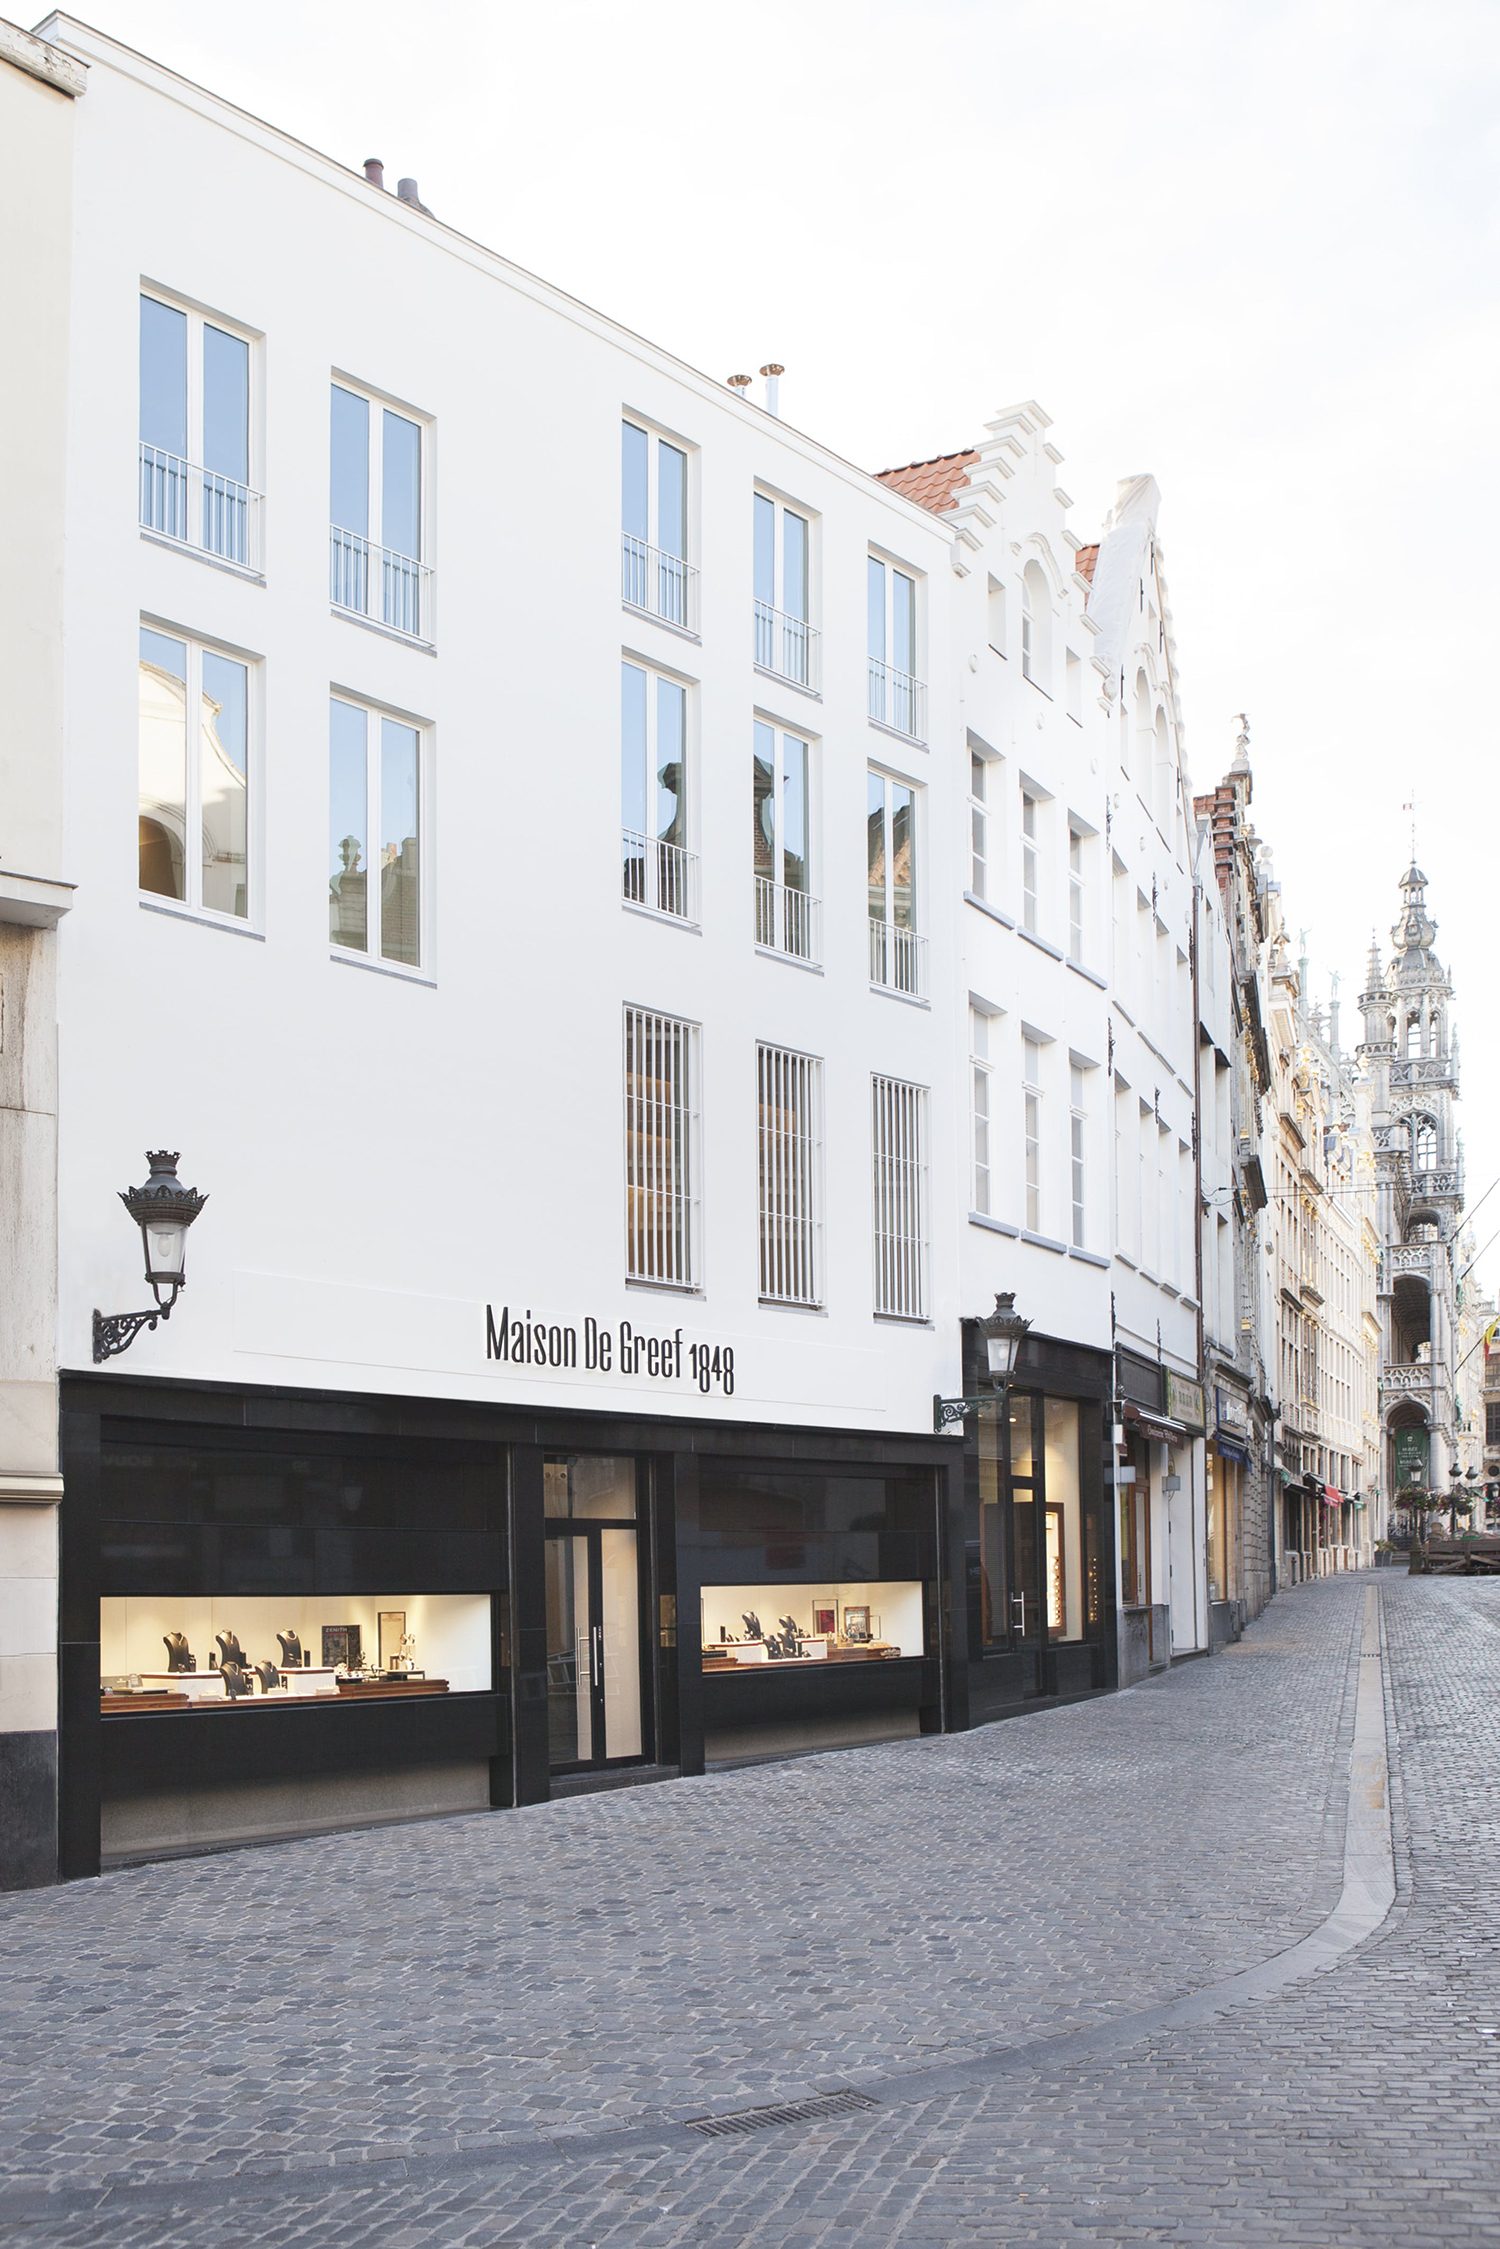 Logotype and signage by Base Design for high-end jewellery brand, expert watchmaker and retailer Maison De Greef 1848